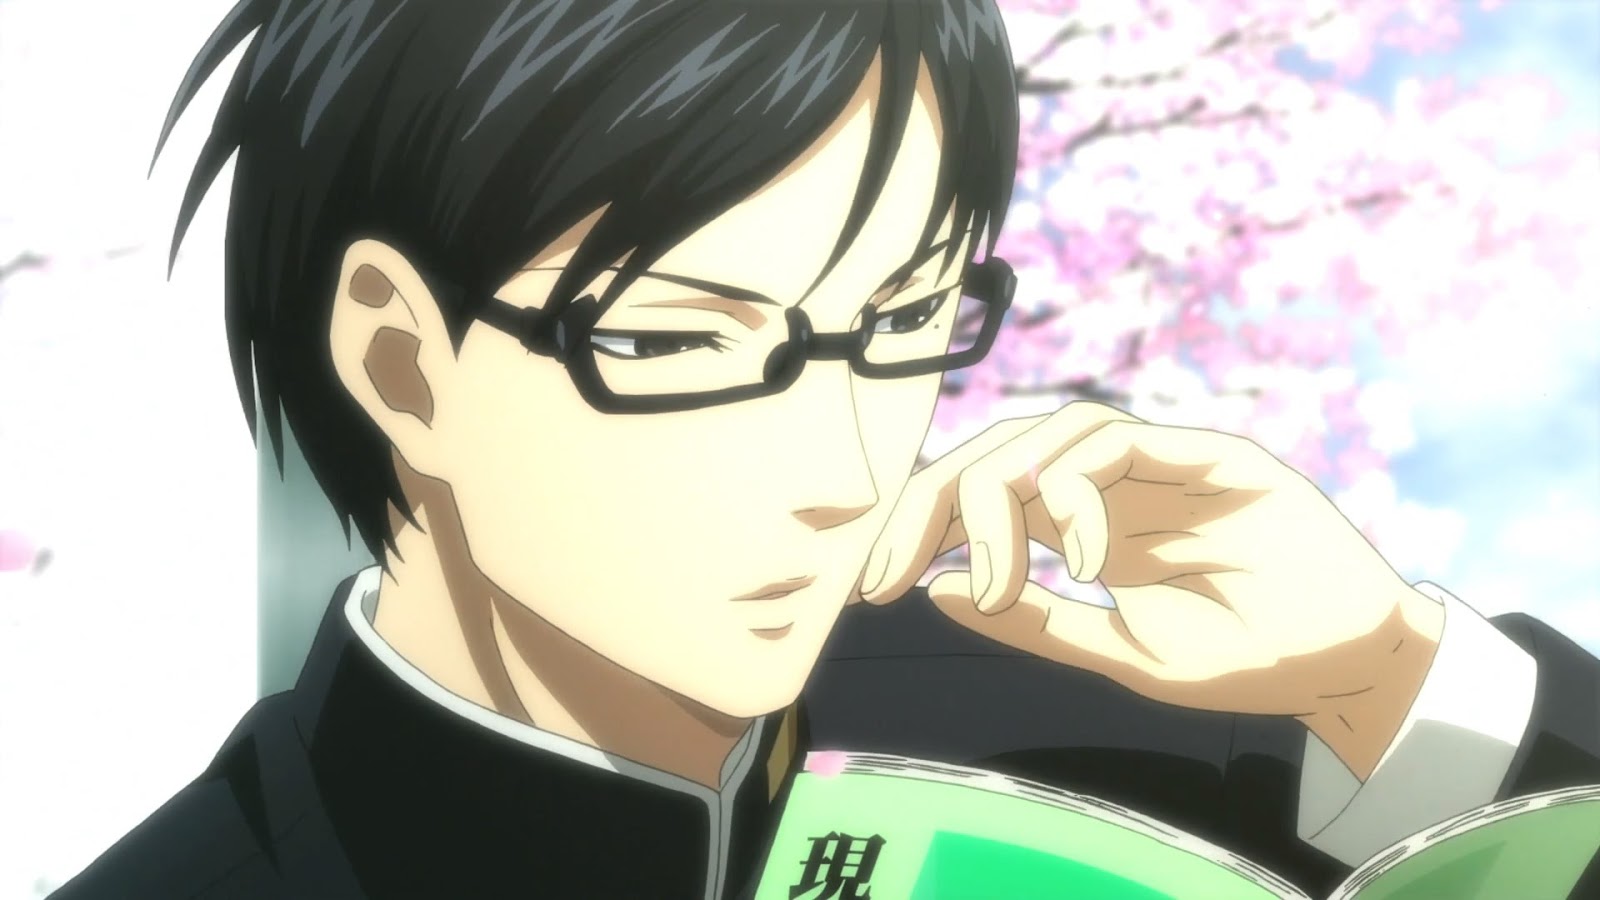 Be as Cool as Sakamoto from “Haven't You Heard? I'm Sakamoto” in These  Glasses!, Press Release News